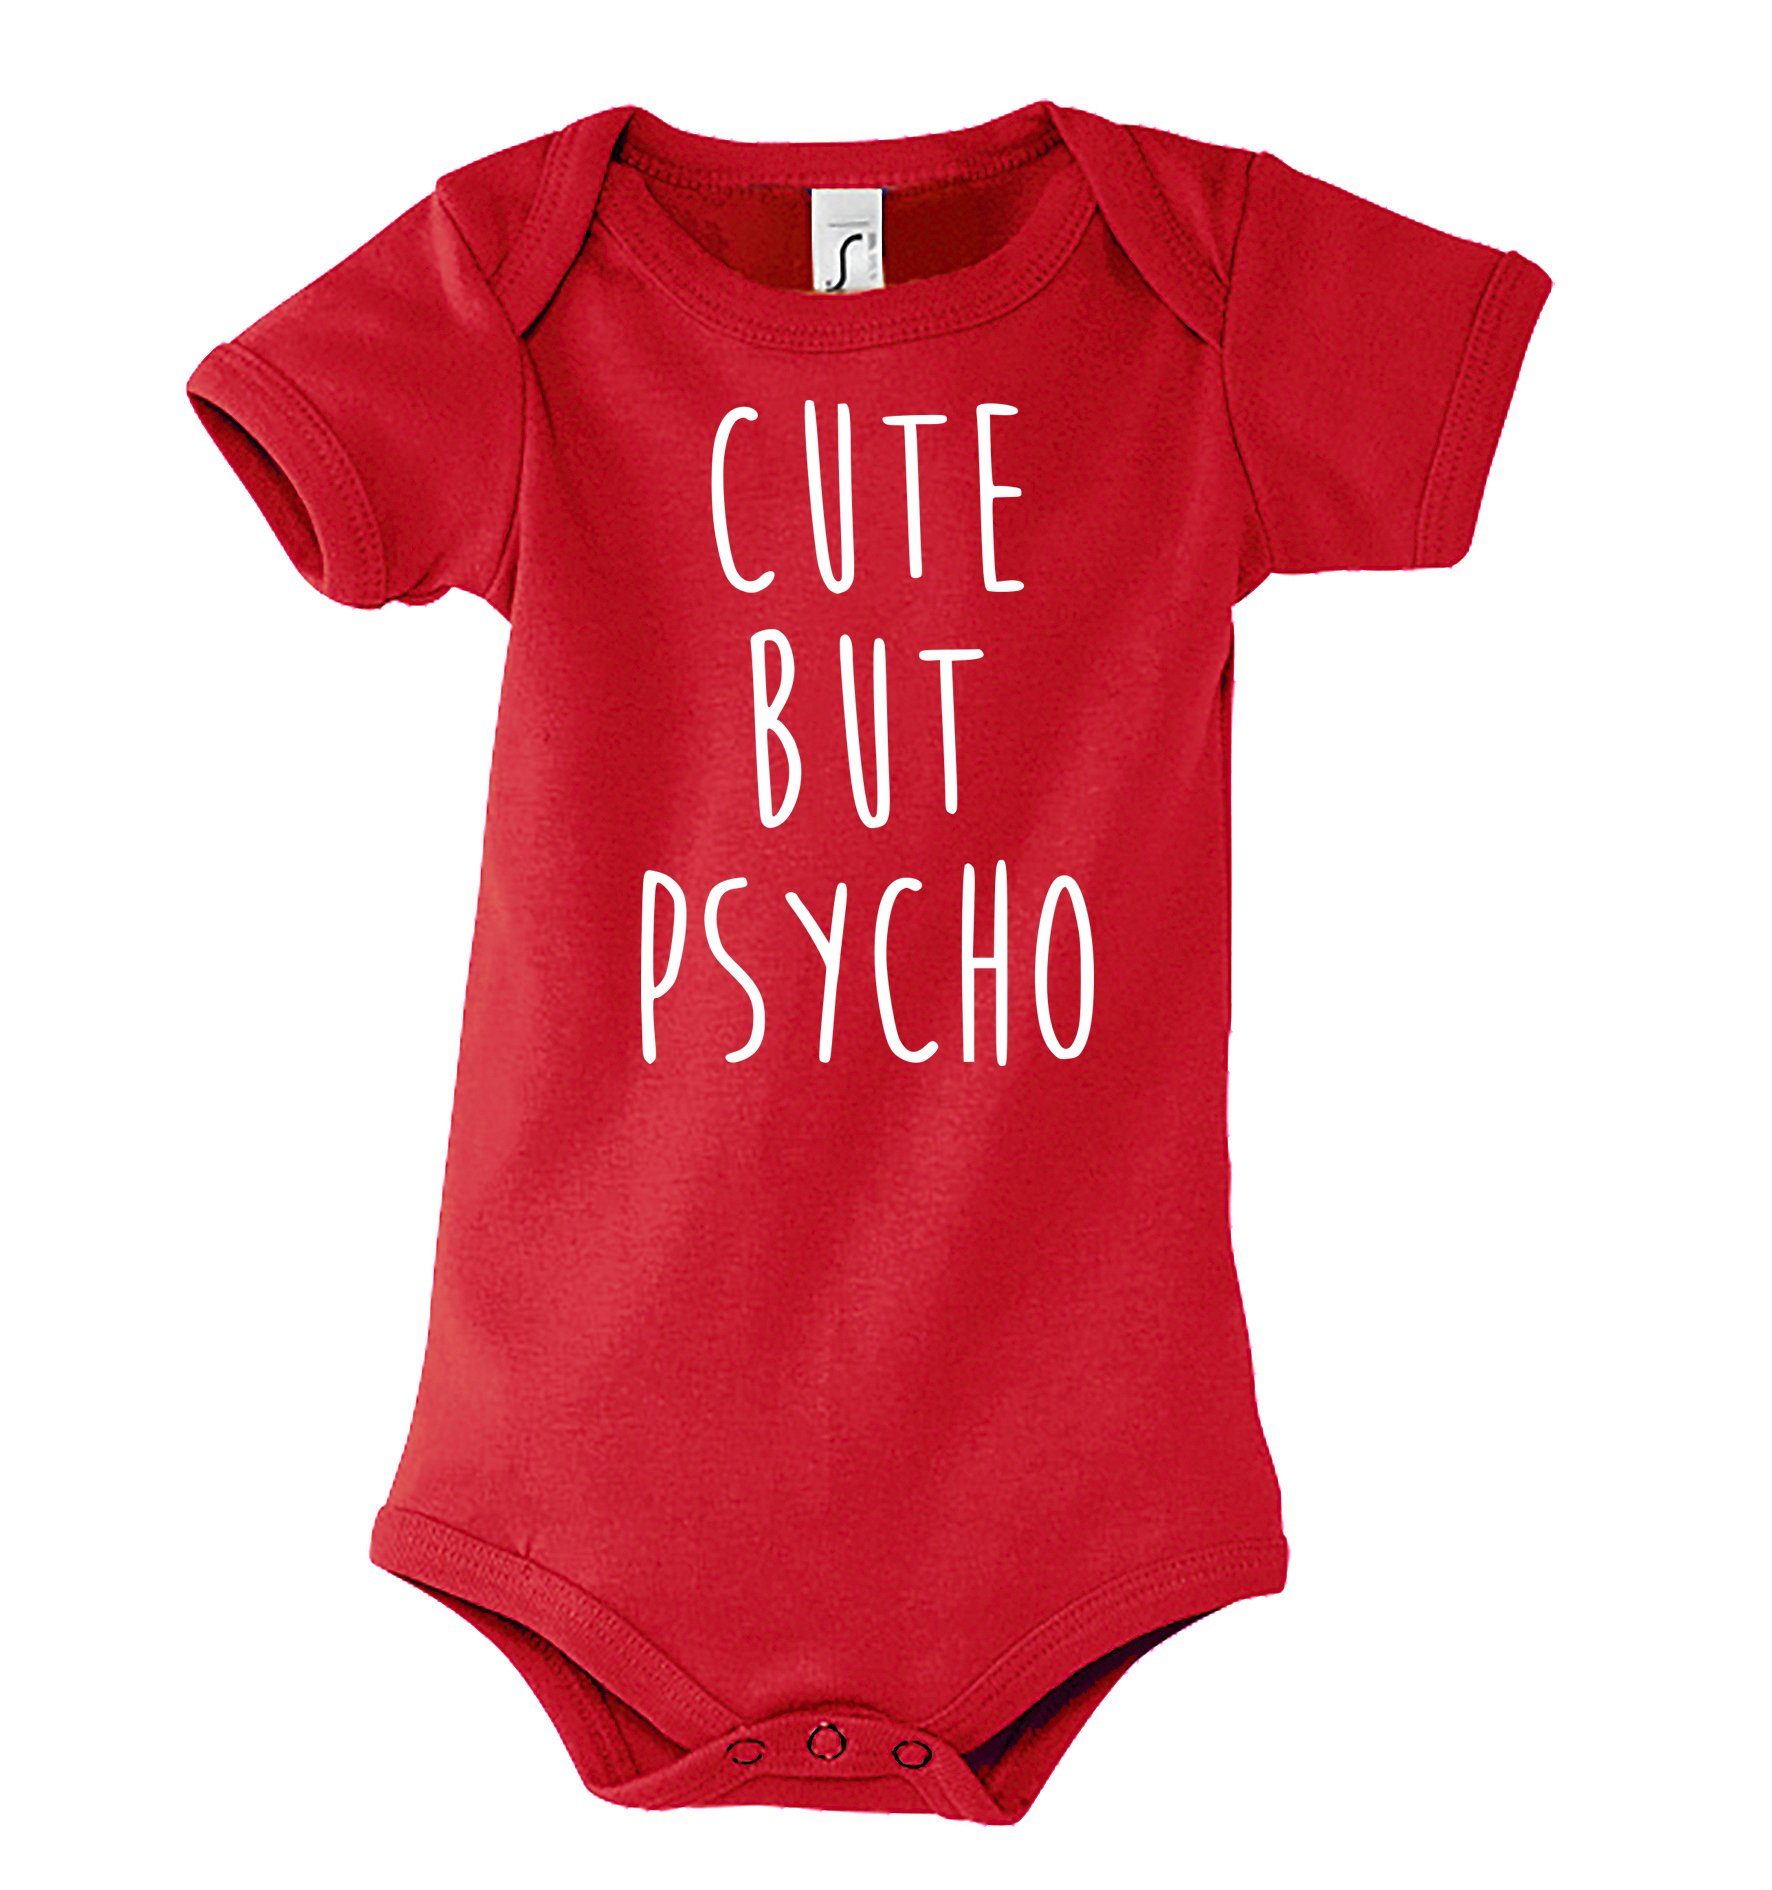 mit but Rot Designz Body Youth in Strampler Frontprint Design, Cut Baby Kurzarmbody tollem Psycho